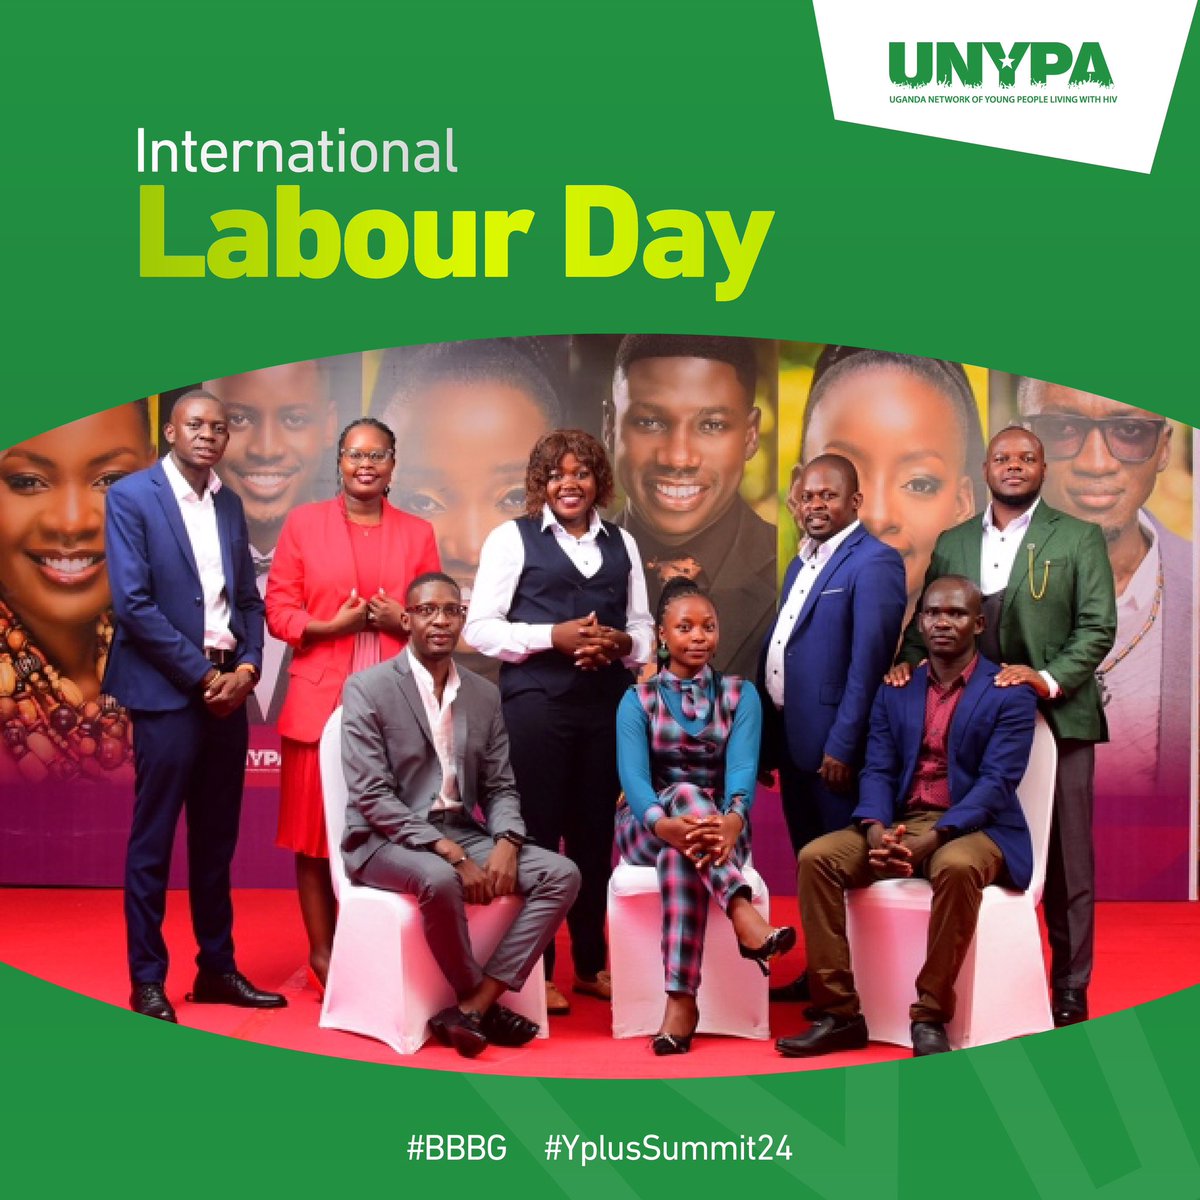 Dear YPLHIV, May this International Labour Day bring you renewed energy and motivation to pursue your goals with passion and dedication. #YPlusSummit24 #BBBG